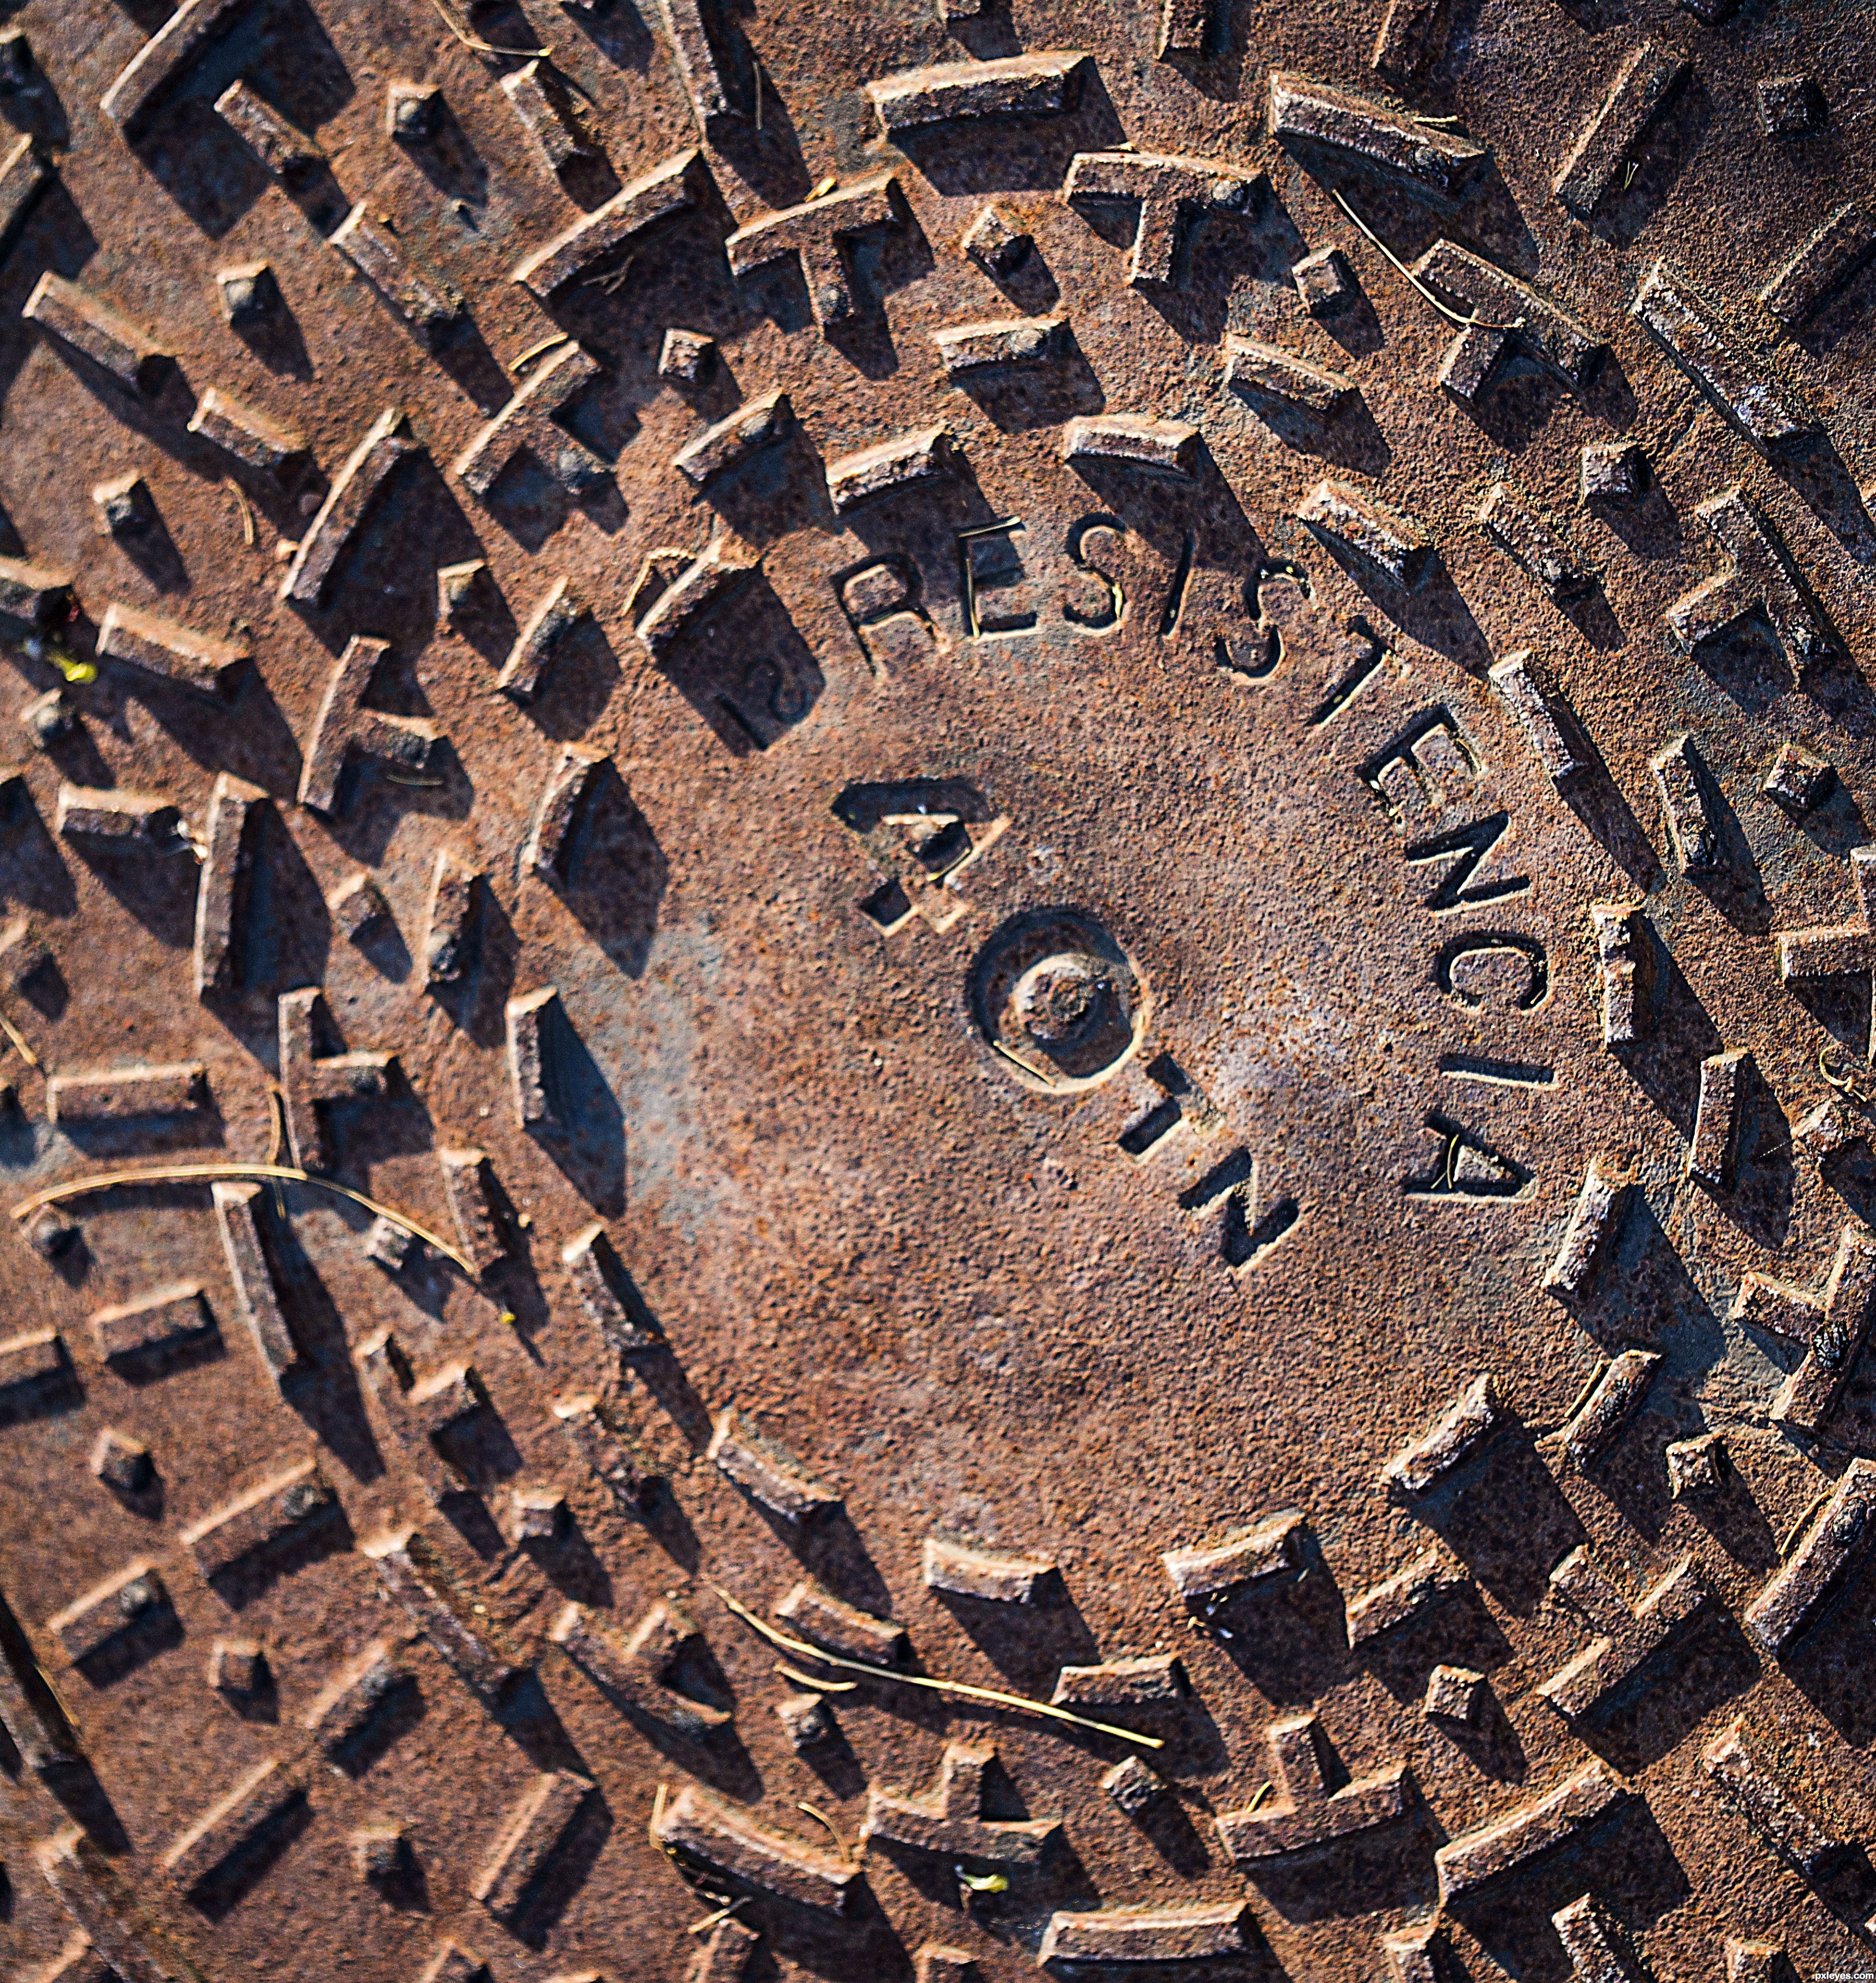 Rusted manhole cover picture, by Clinge for: rust 2 photography ...